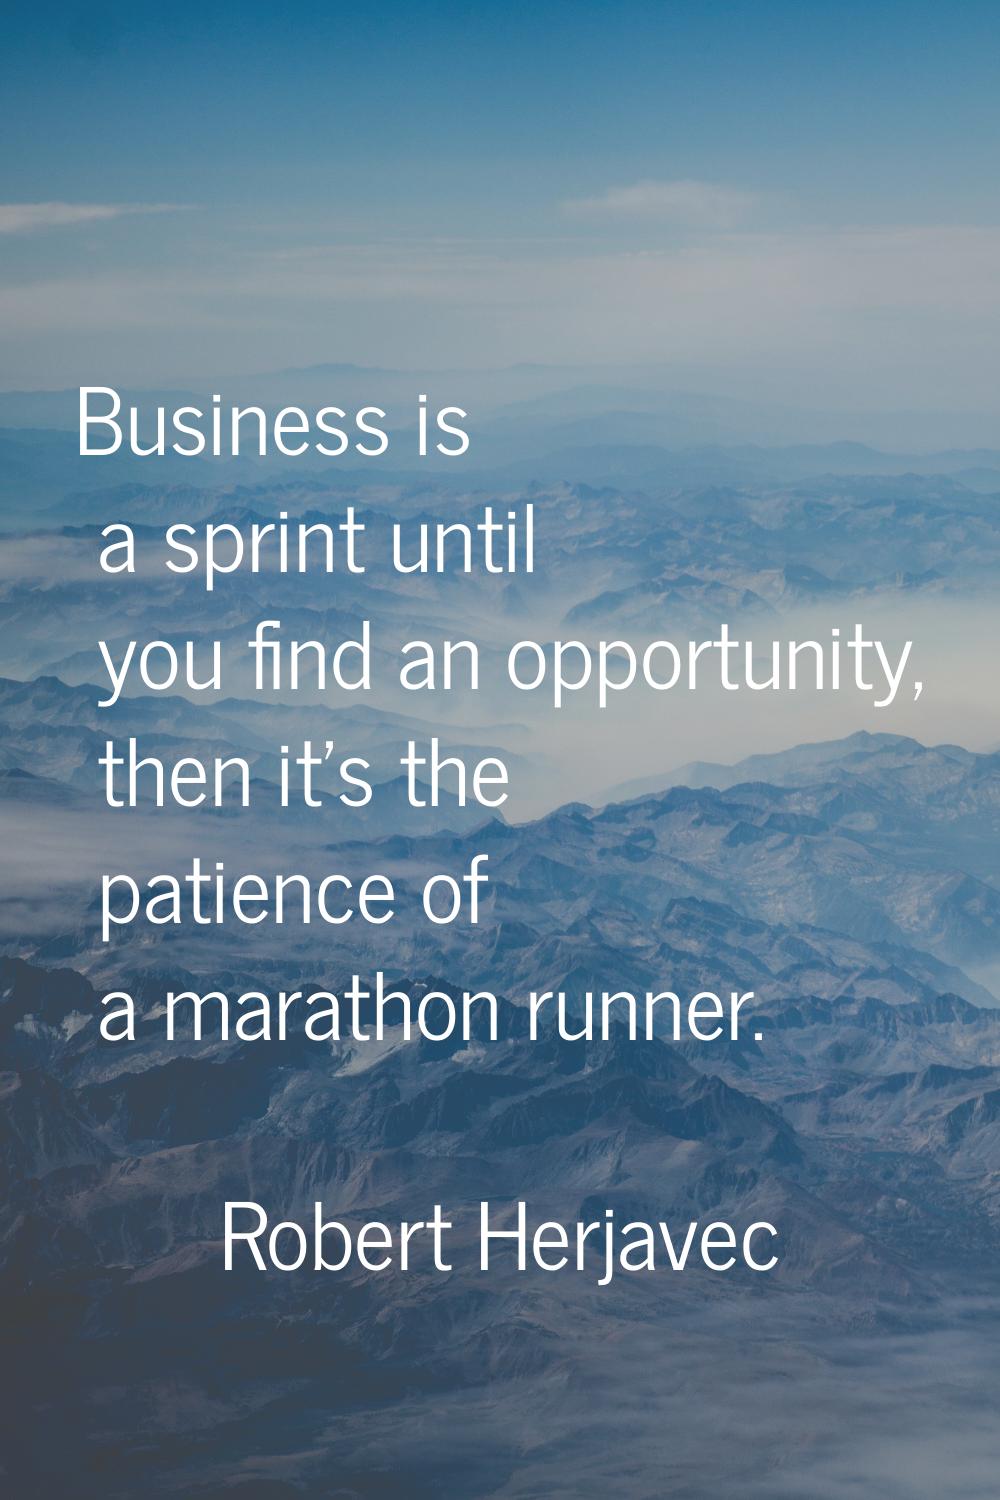 Business is a sprint until you find an opportunity, then it's the patience of a marathon runner.